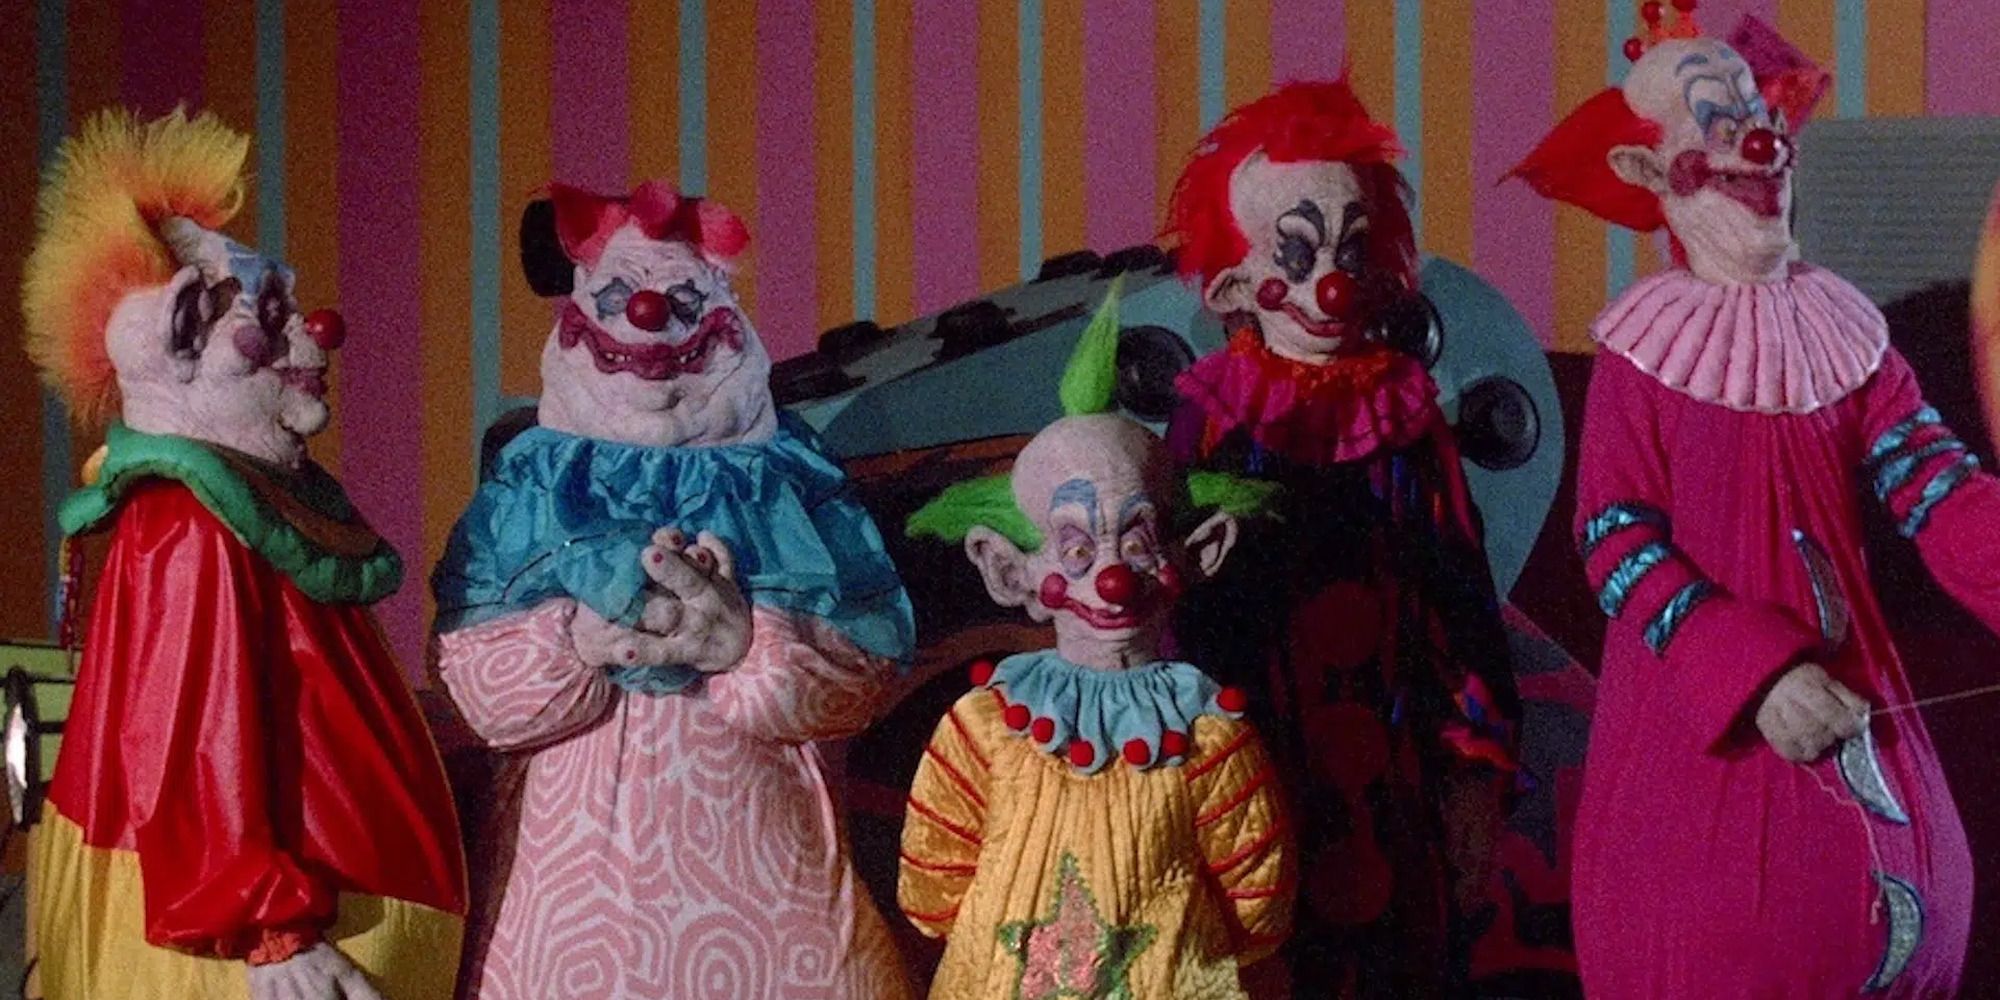 The clowns from 'Killer Klowns from Outer Space'